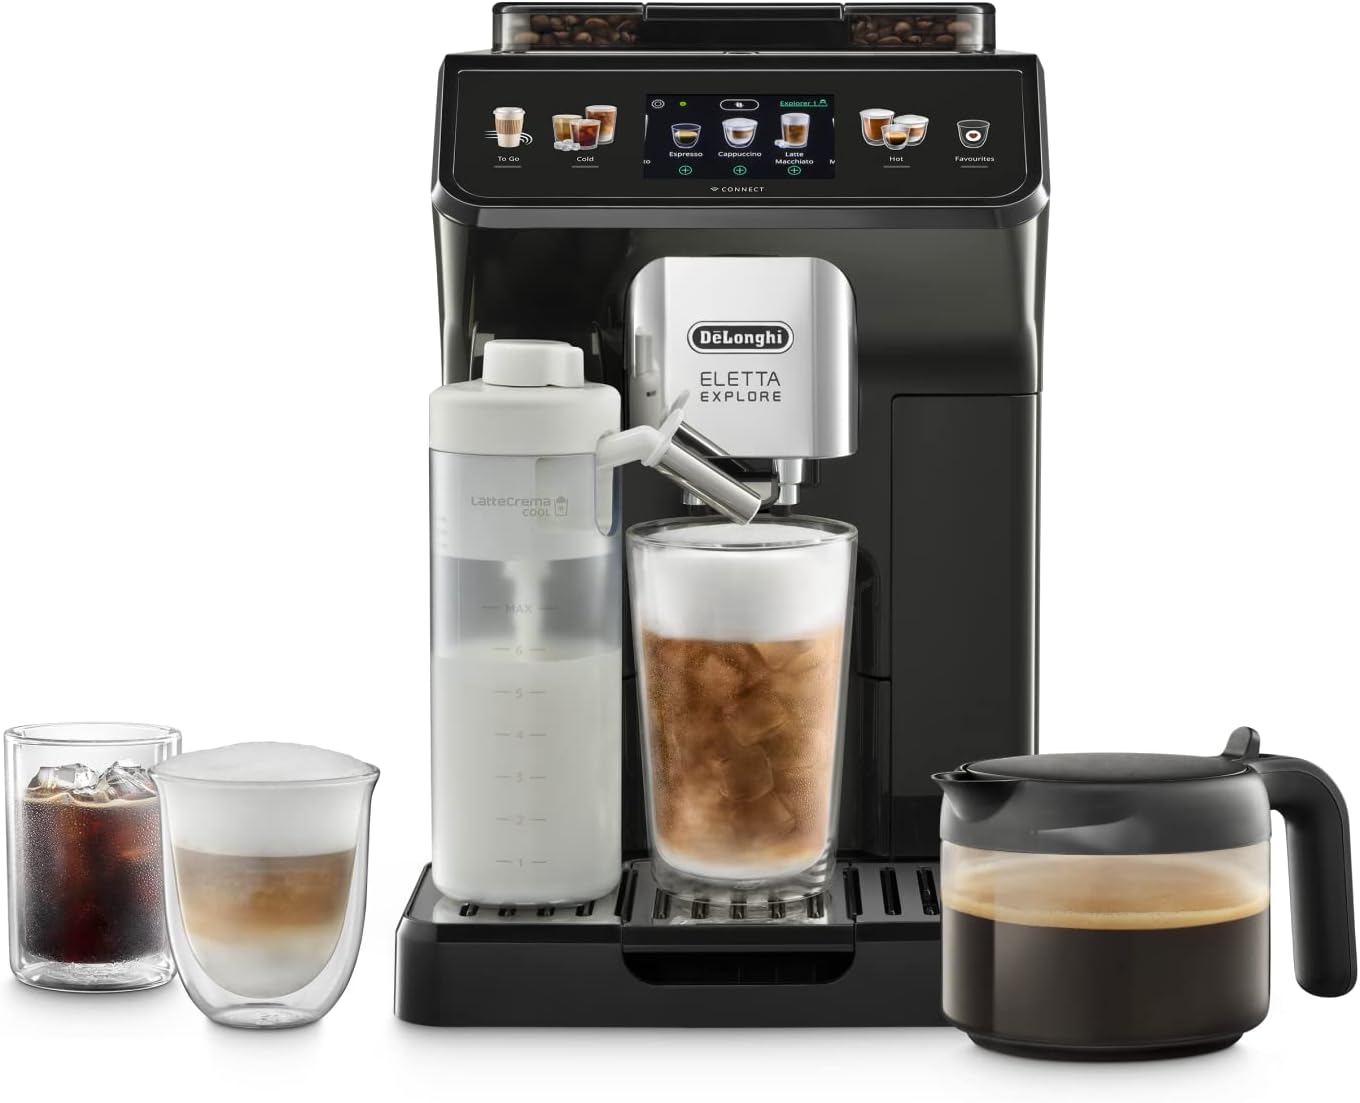 SEVERIN KA 5829 Duo Filter Coffee Machine with Thermal Jug, Coffee Machine  for up to 16 Cu